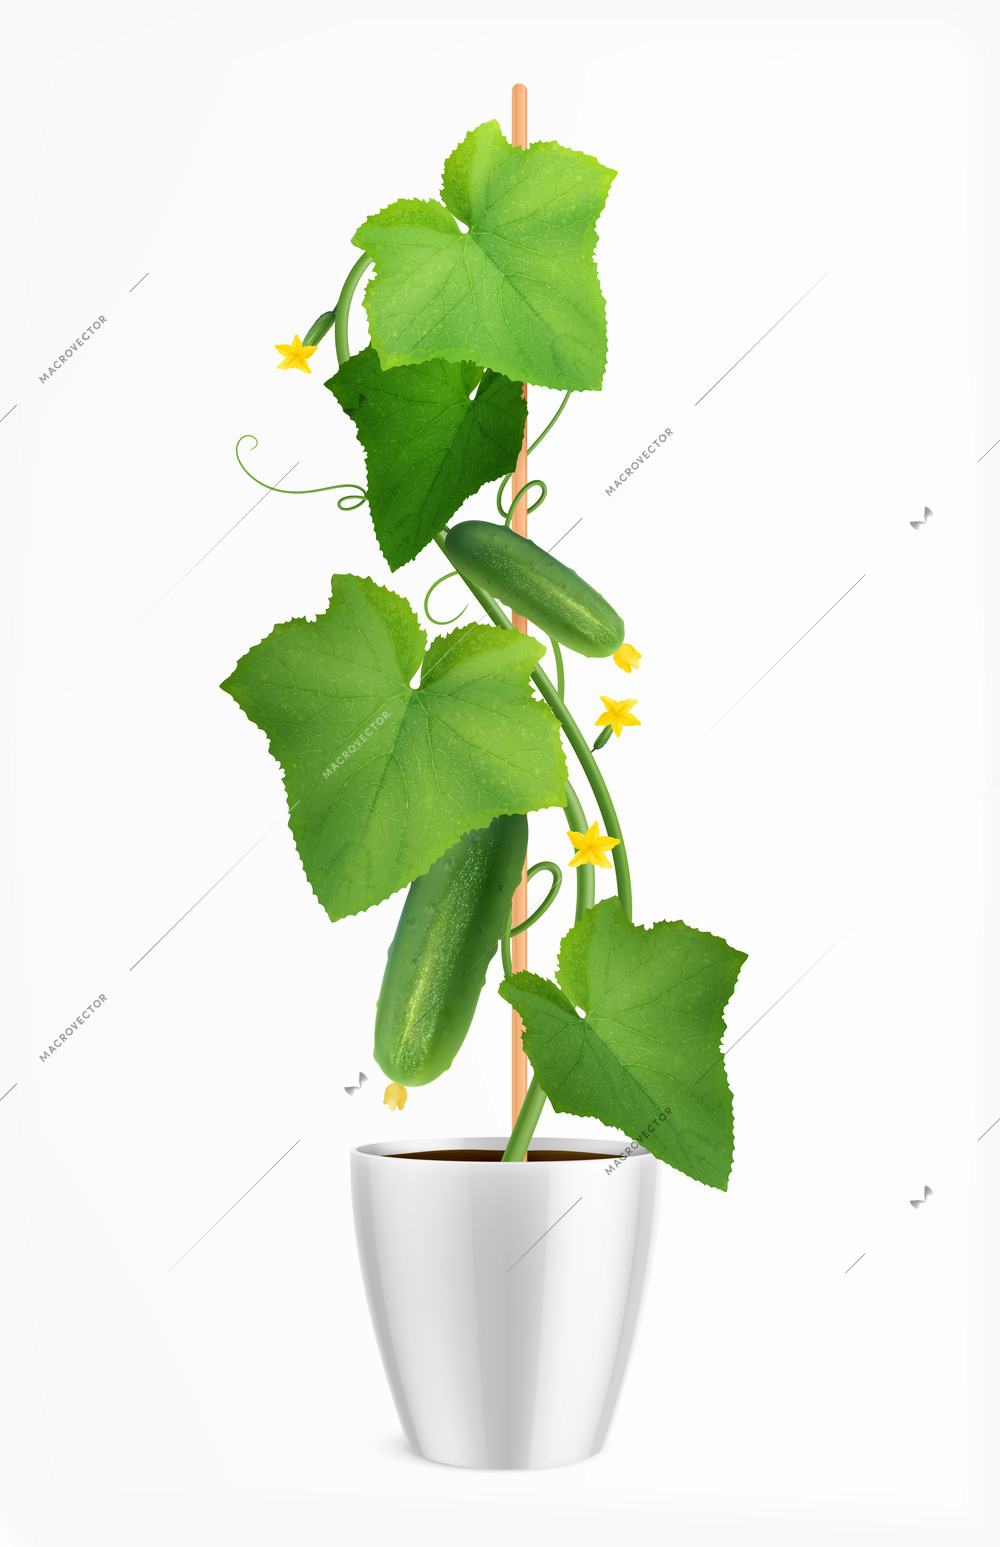 Realistic potted cucumber plant with green leaves ripe vegetables and flowers vector illustration